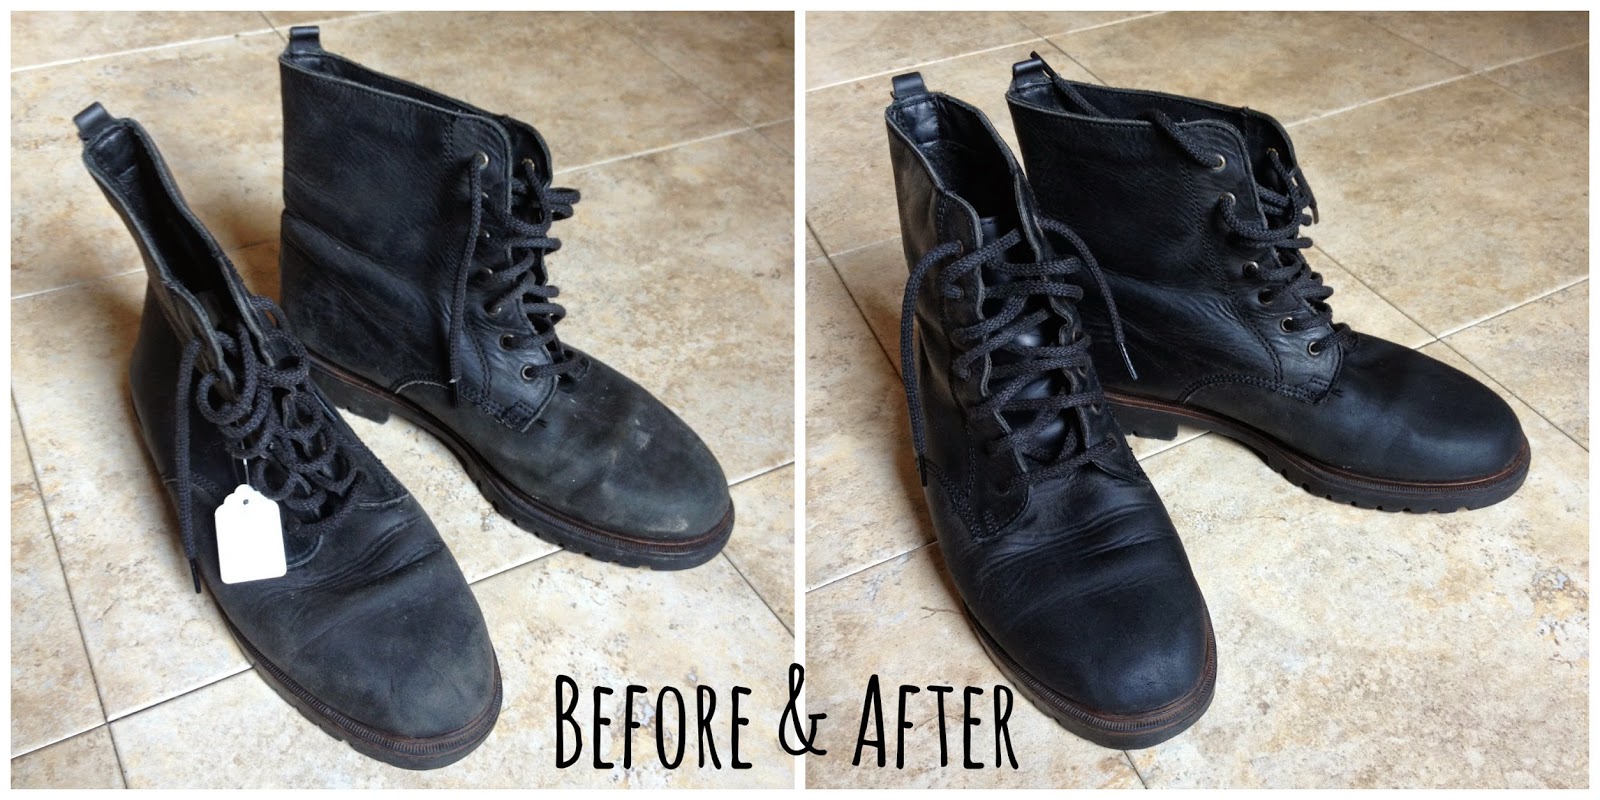 Little Did You Know...: Quick 'Fix' Friday: Cleaning Thrifted Shoes